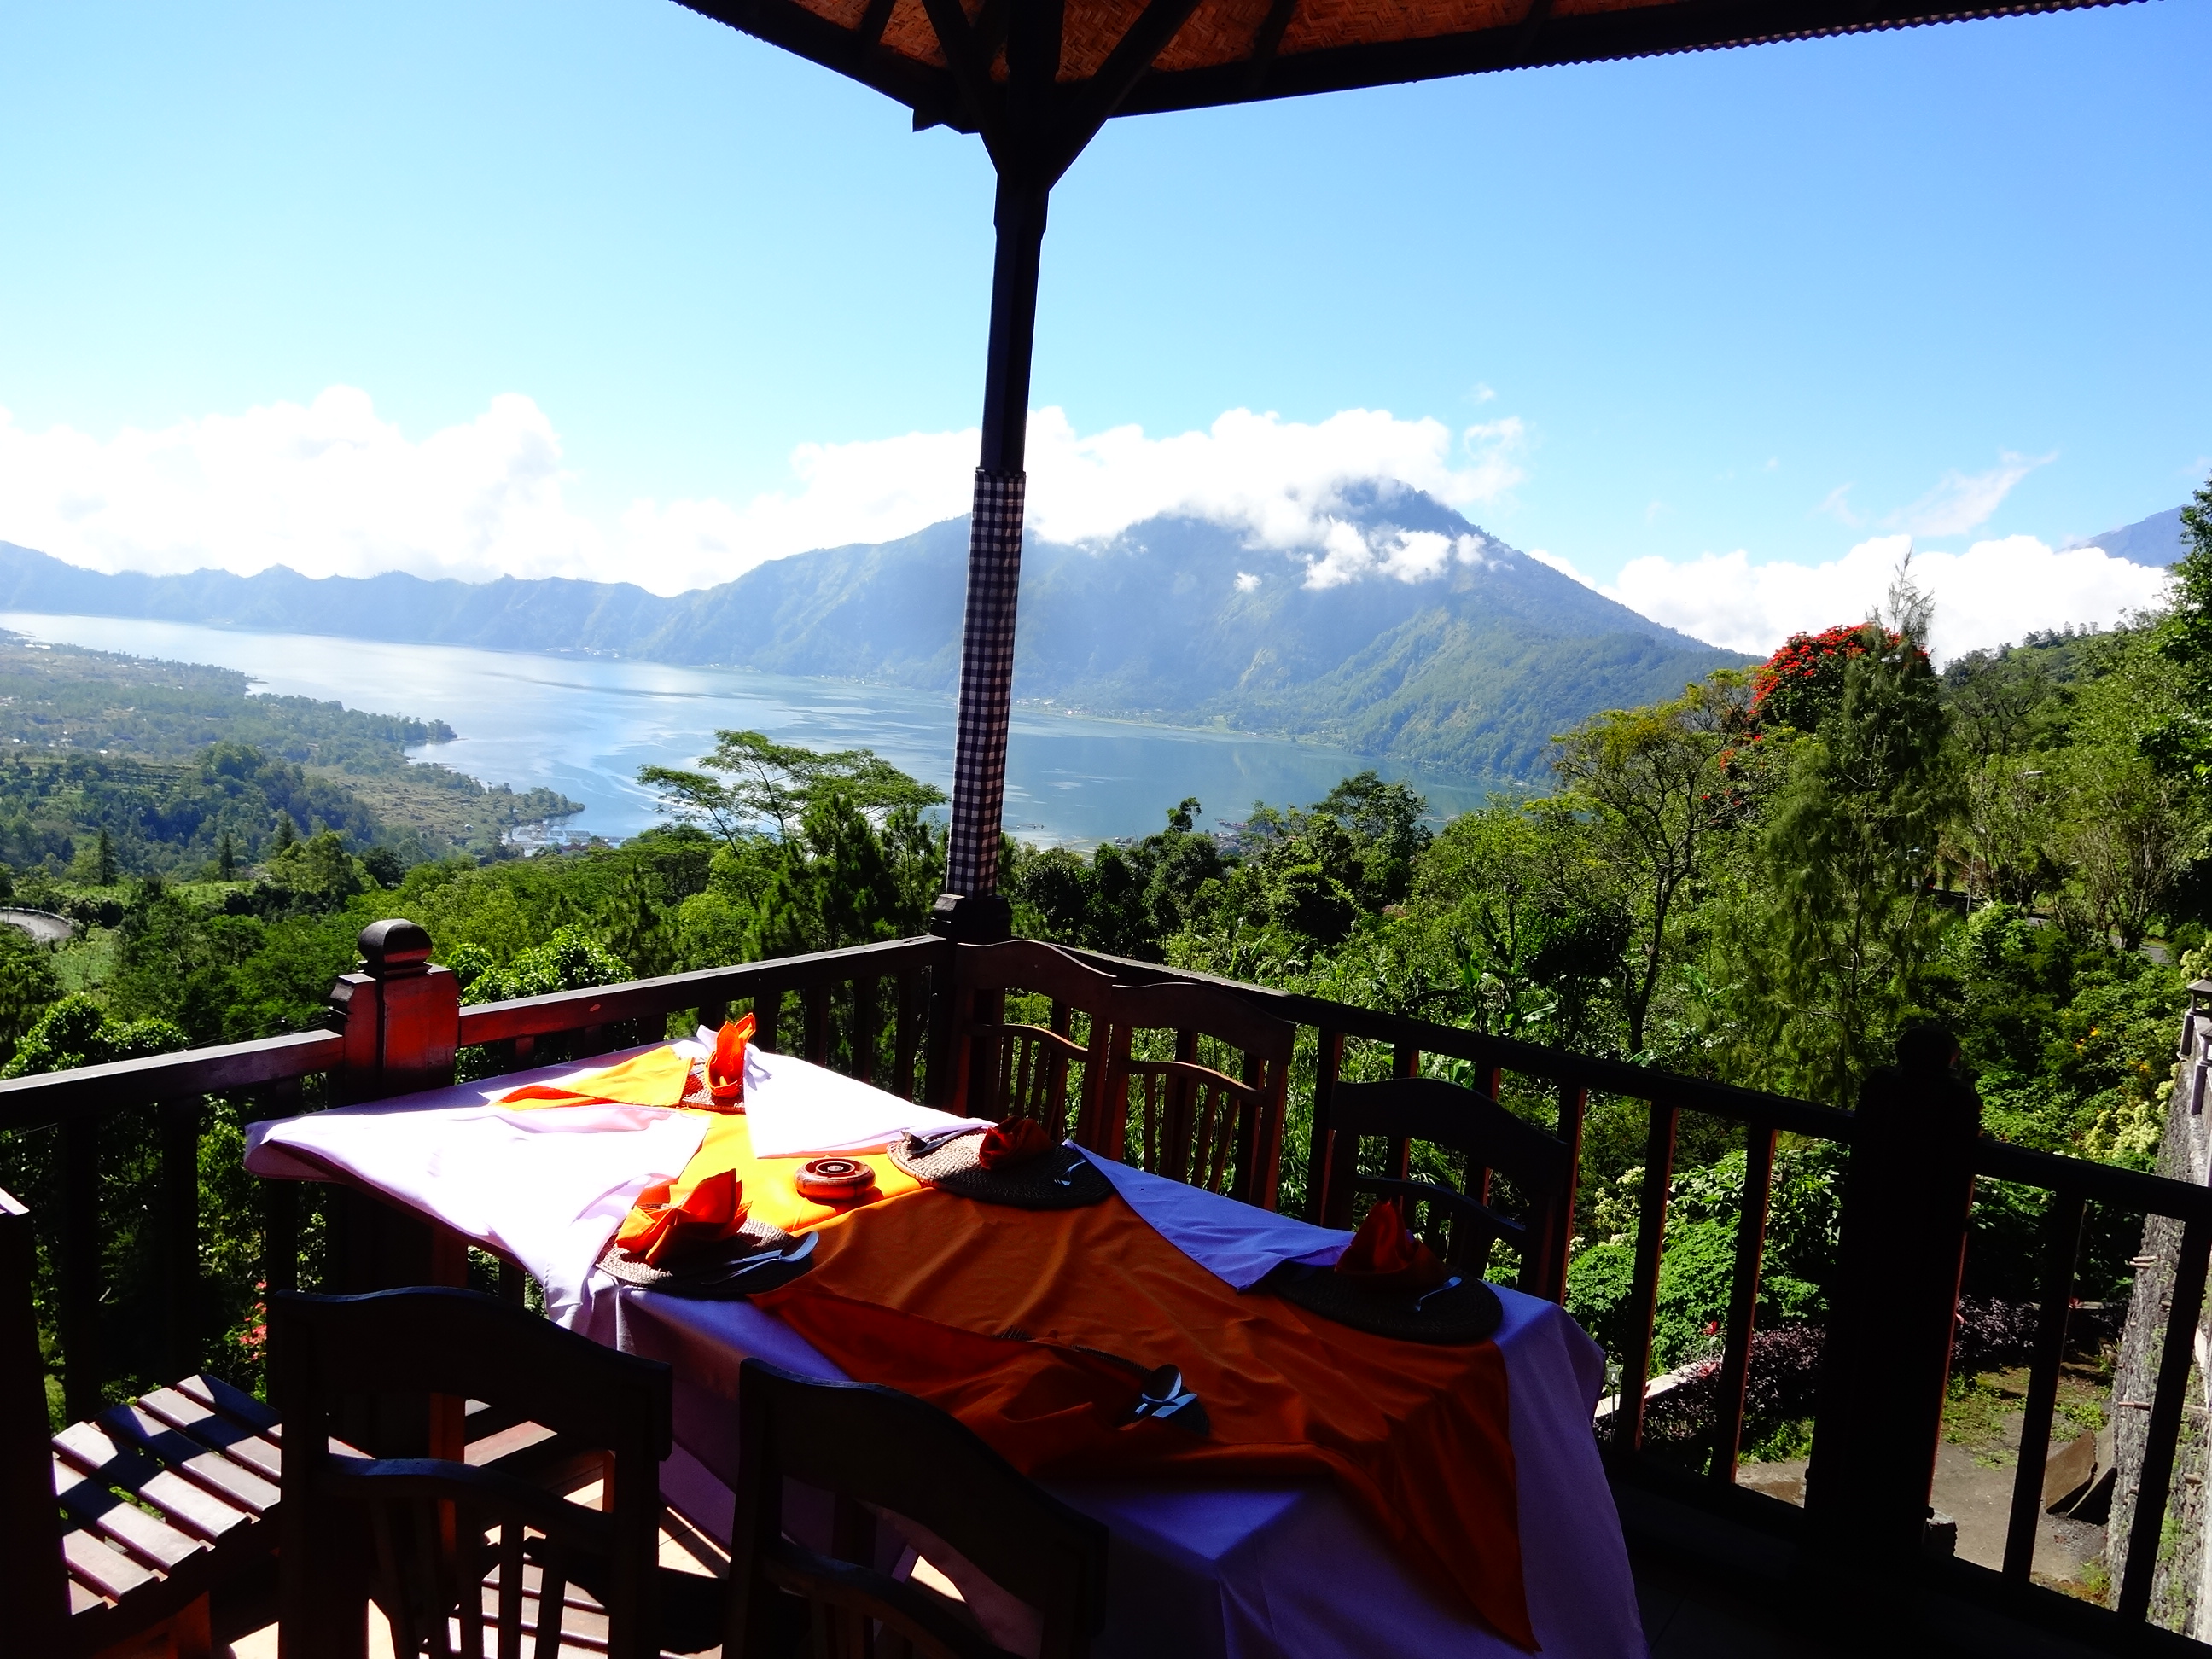 Breakfast with a view of Mount Batur and the crater lake